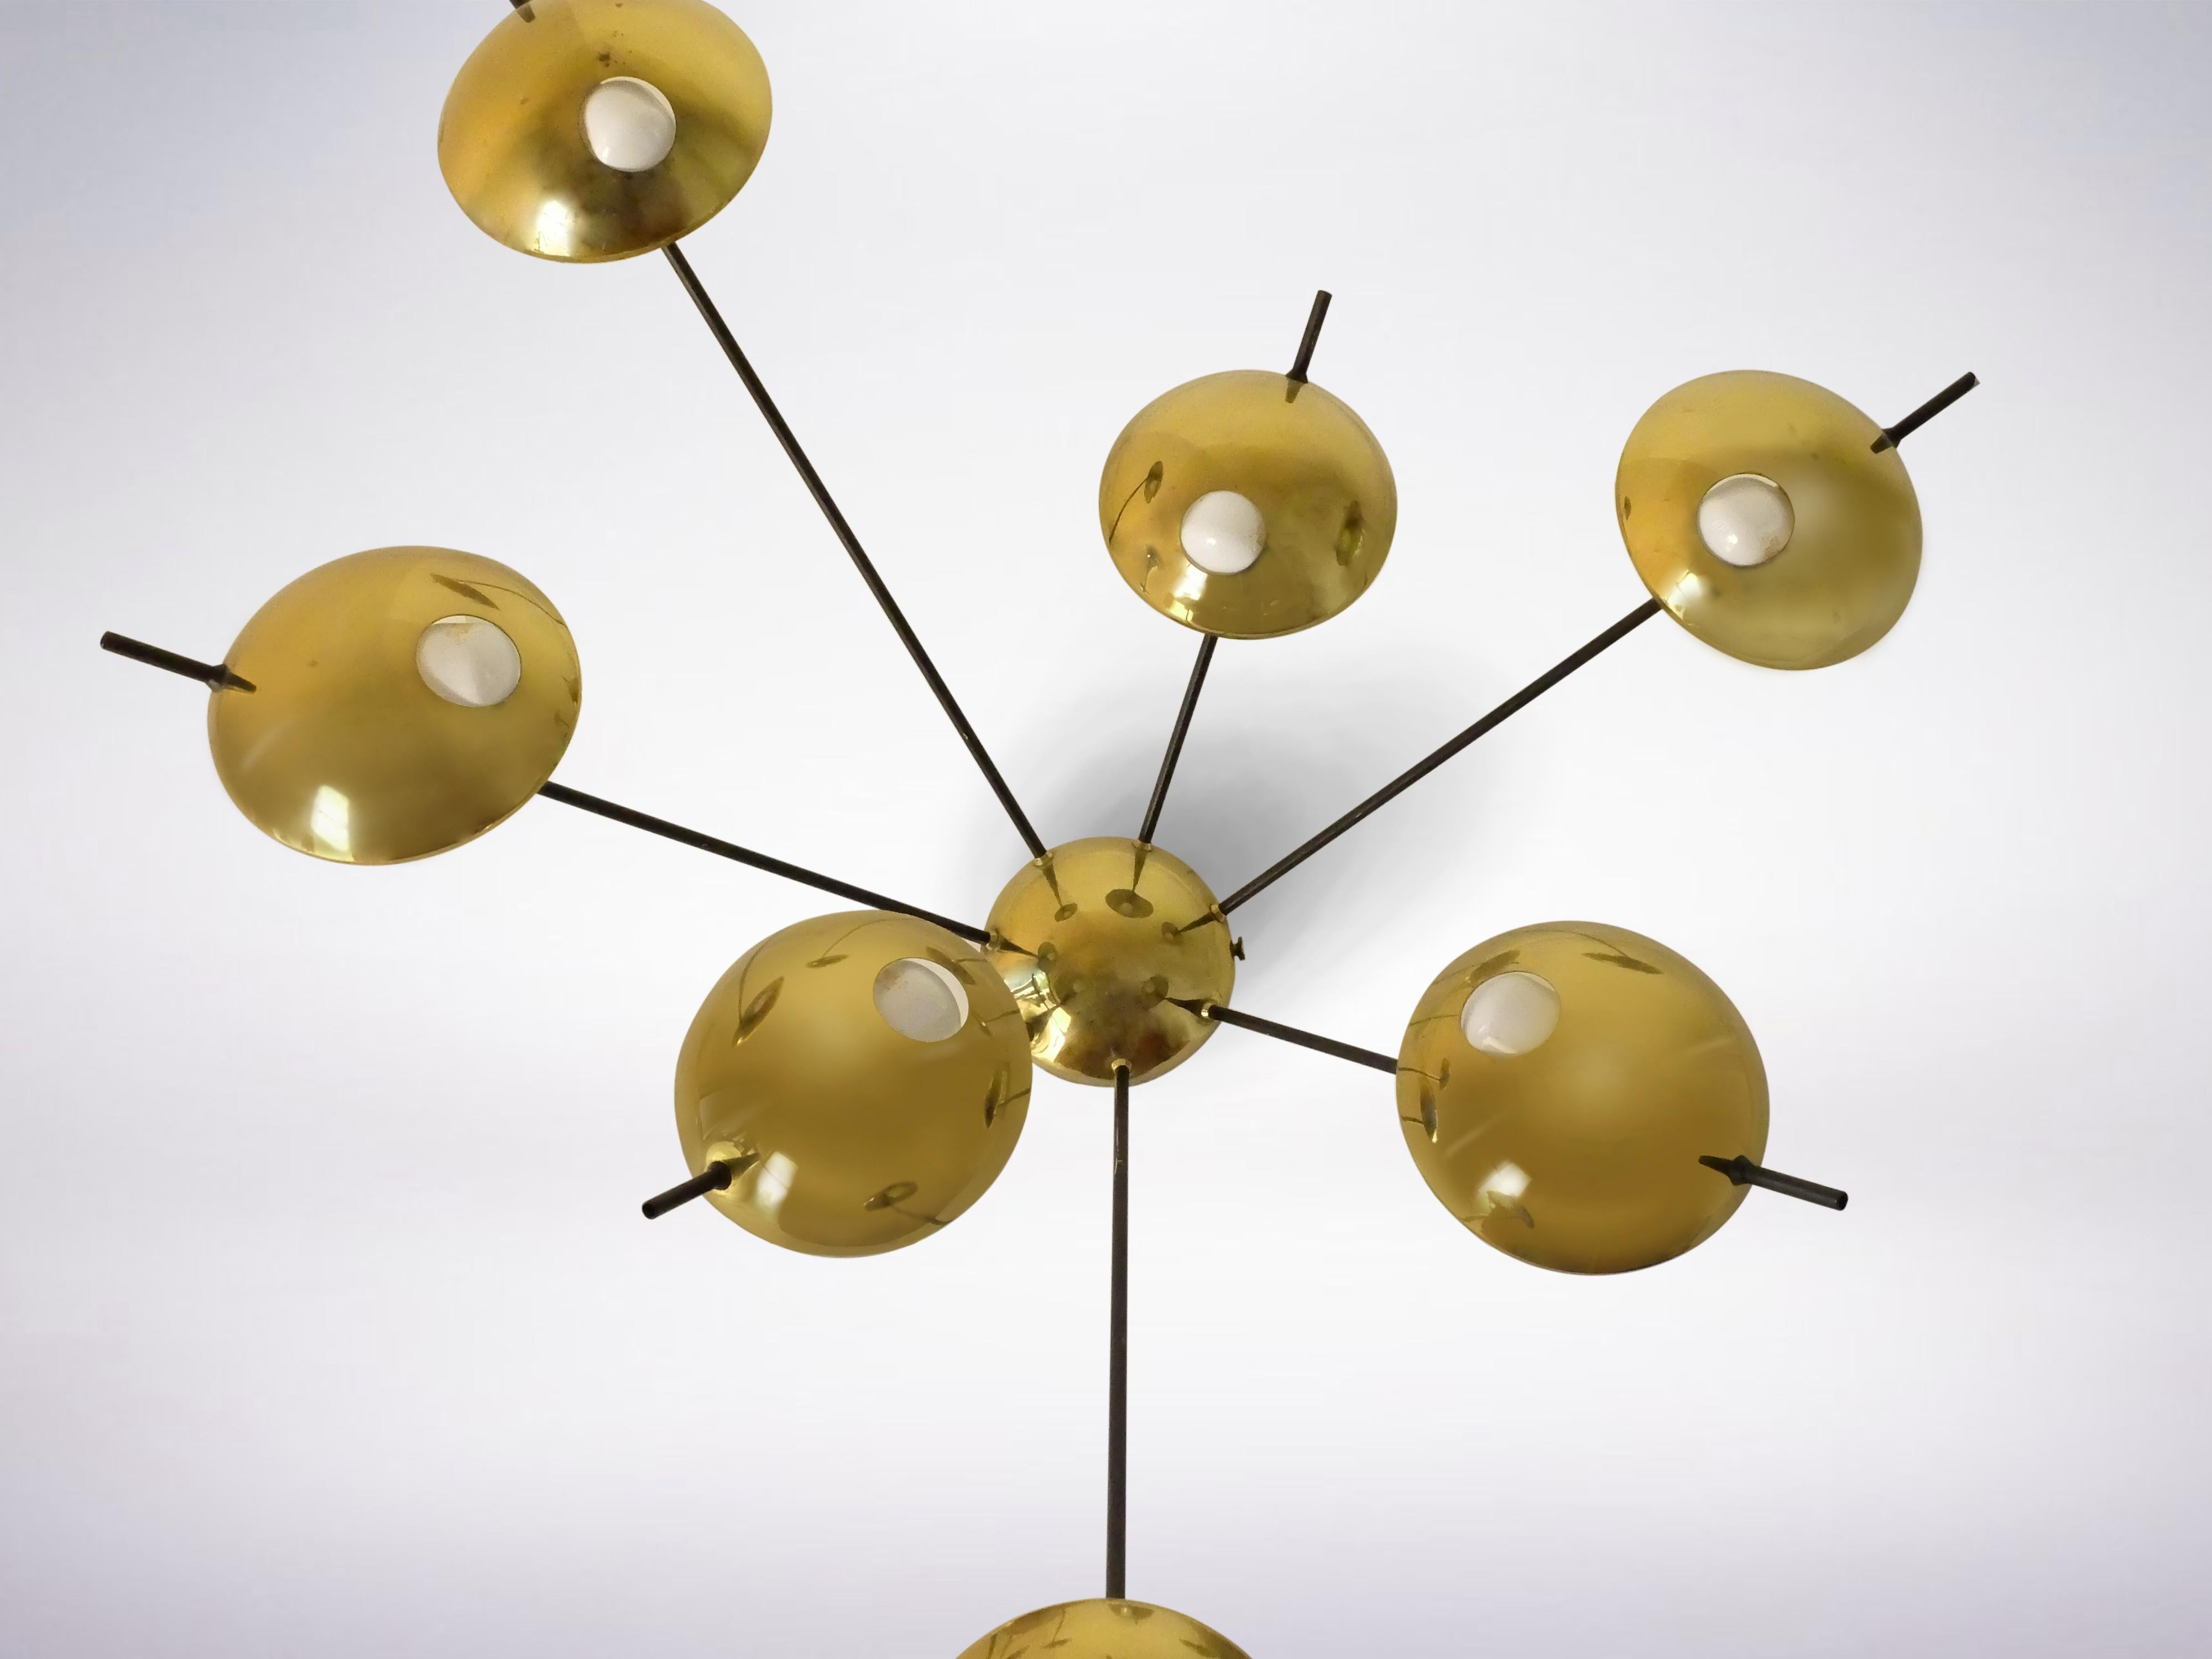 Original Stilnovo Applique, model 1036 created around the 1950s in Italy.
The central fixture holds up 7 arms in tubular metal in black enamel, keeping in place at their ends polished brass hemispheres with their respective bulbs placed under